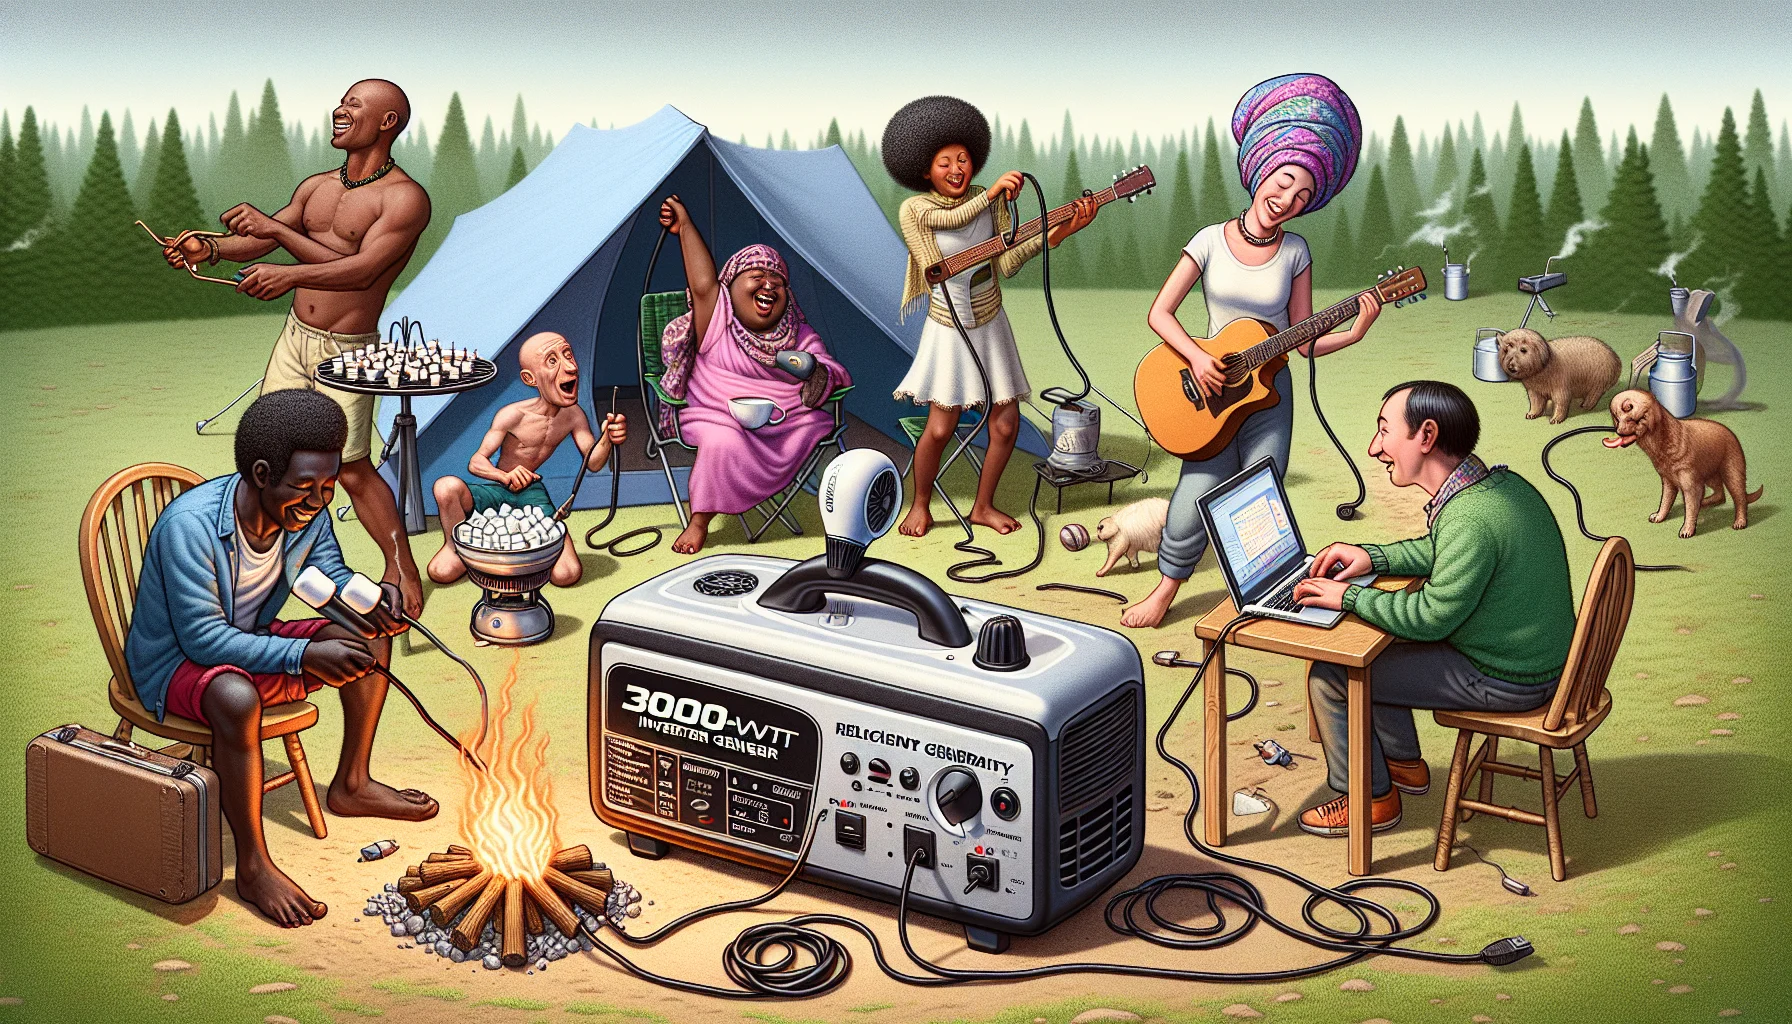 Create a humorous scenario that captures the importance of generating your own electricity. Imagine a group of diverse individuals around a resilient 3000-watt inverter generator in a campsite. An African man is roasting marshmallows over it, an East Asian woman is drying her hair with a hairdryer powered by it, a Middle-Eastern man is charging his electric guitar and lastly, a Caucasian woman is powering her giant desktop computer all from the small yet powerful generator, making it look absurd yet highlighting its strong capabilities.